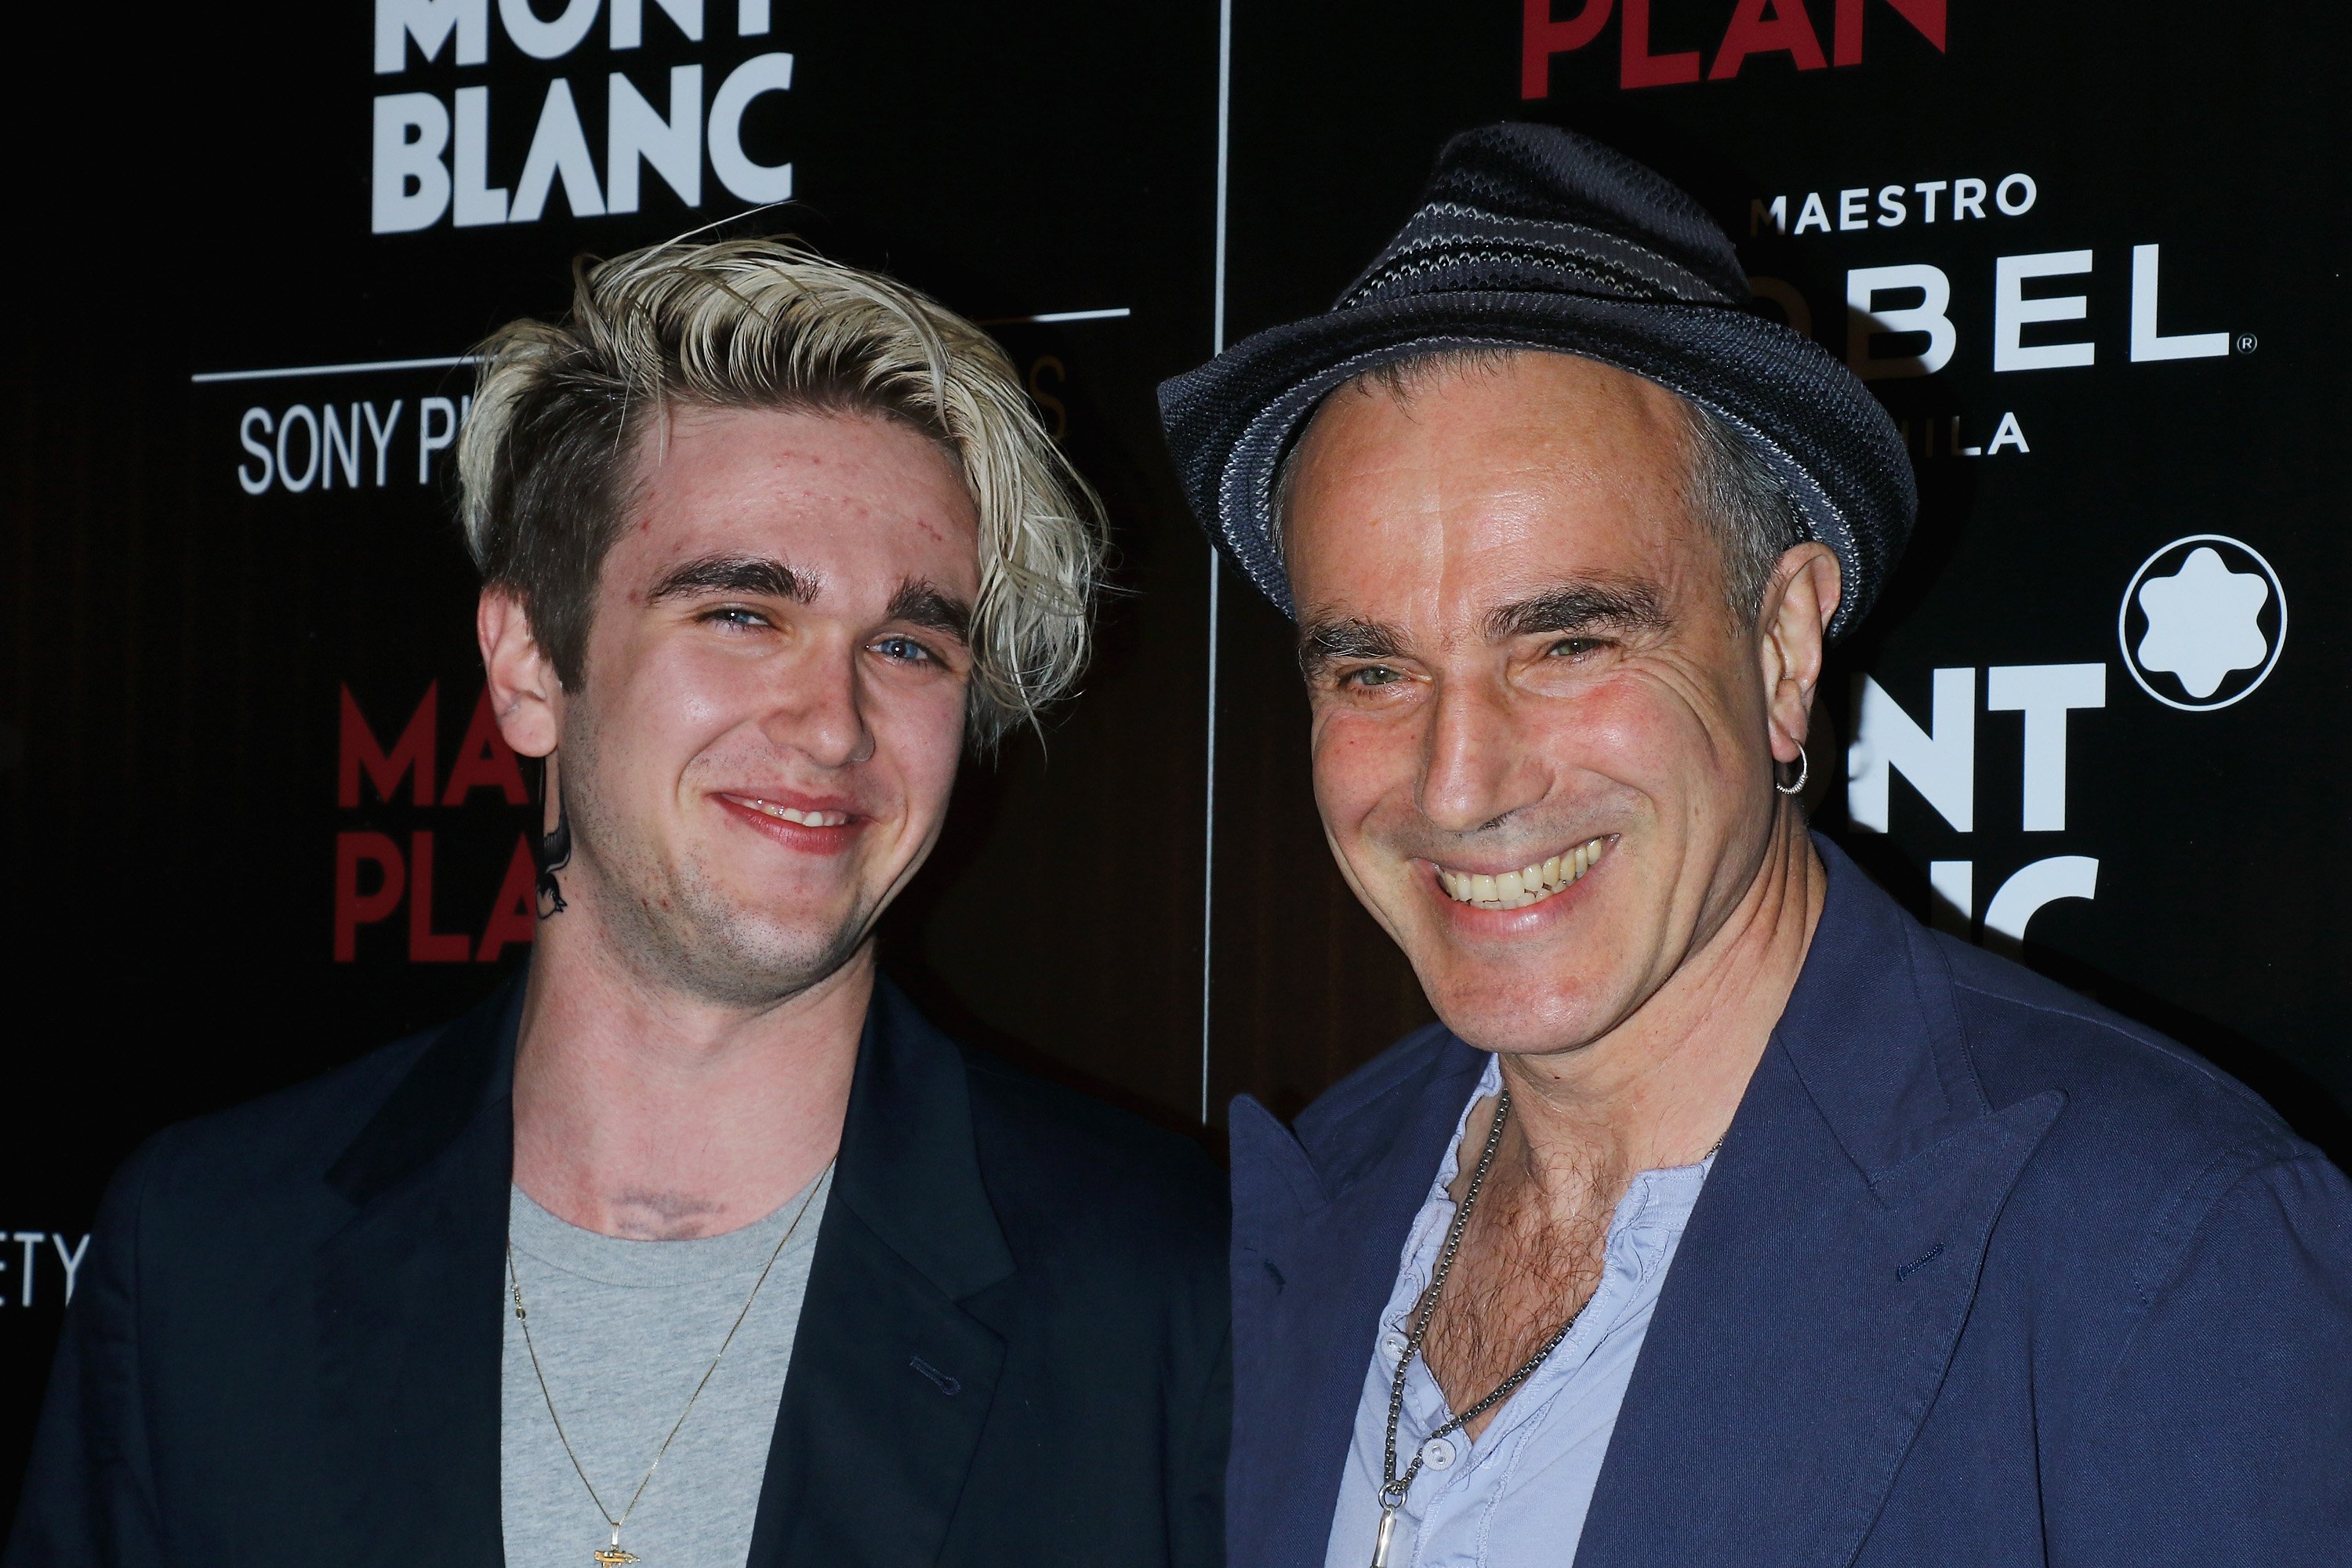 Gabriel-Kane Day-Lewis and Daniel Day-Lewis attend the screening of Sony Pictures Classics' "Maggie's Plan" at Landmark Sunshine Cinema on May 5, 2016, in New York City | Source: Getty Images